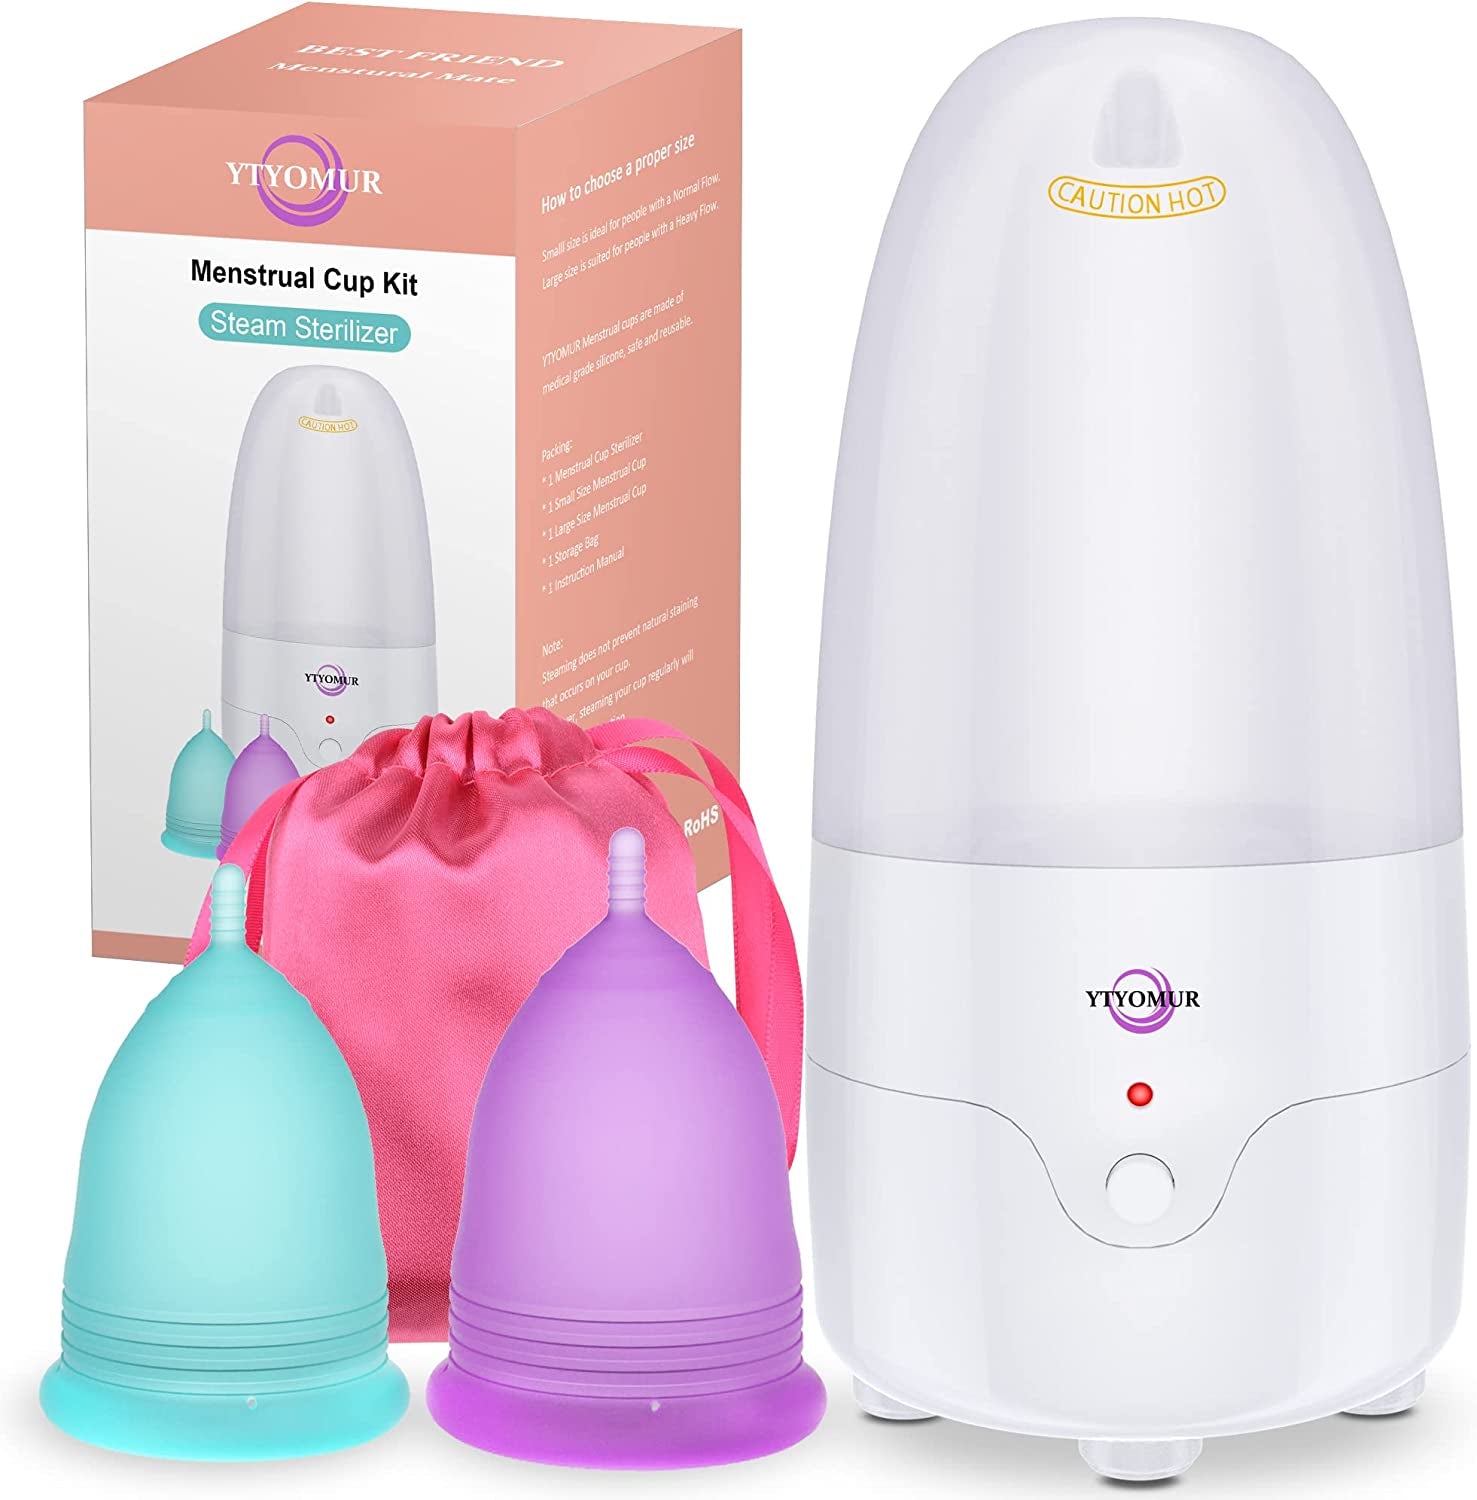 YTYOMUR Menstrual Cup Steamer Sterilizer with 2 Reusable Menstrual Cups, Period Cups Cleaner Wash Kit